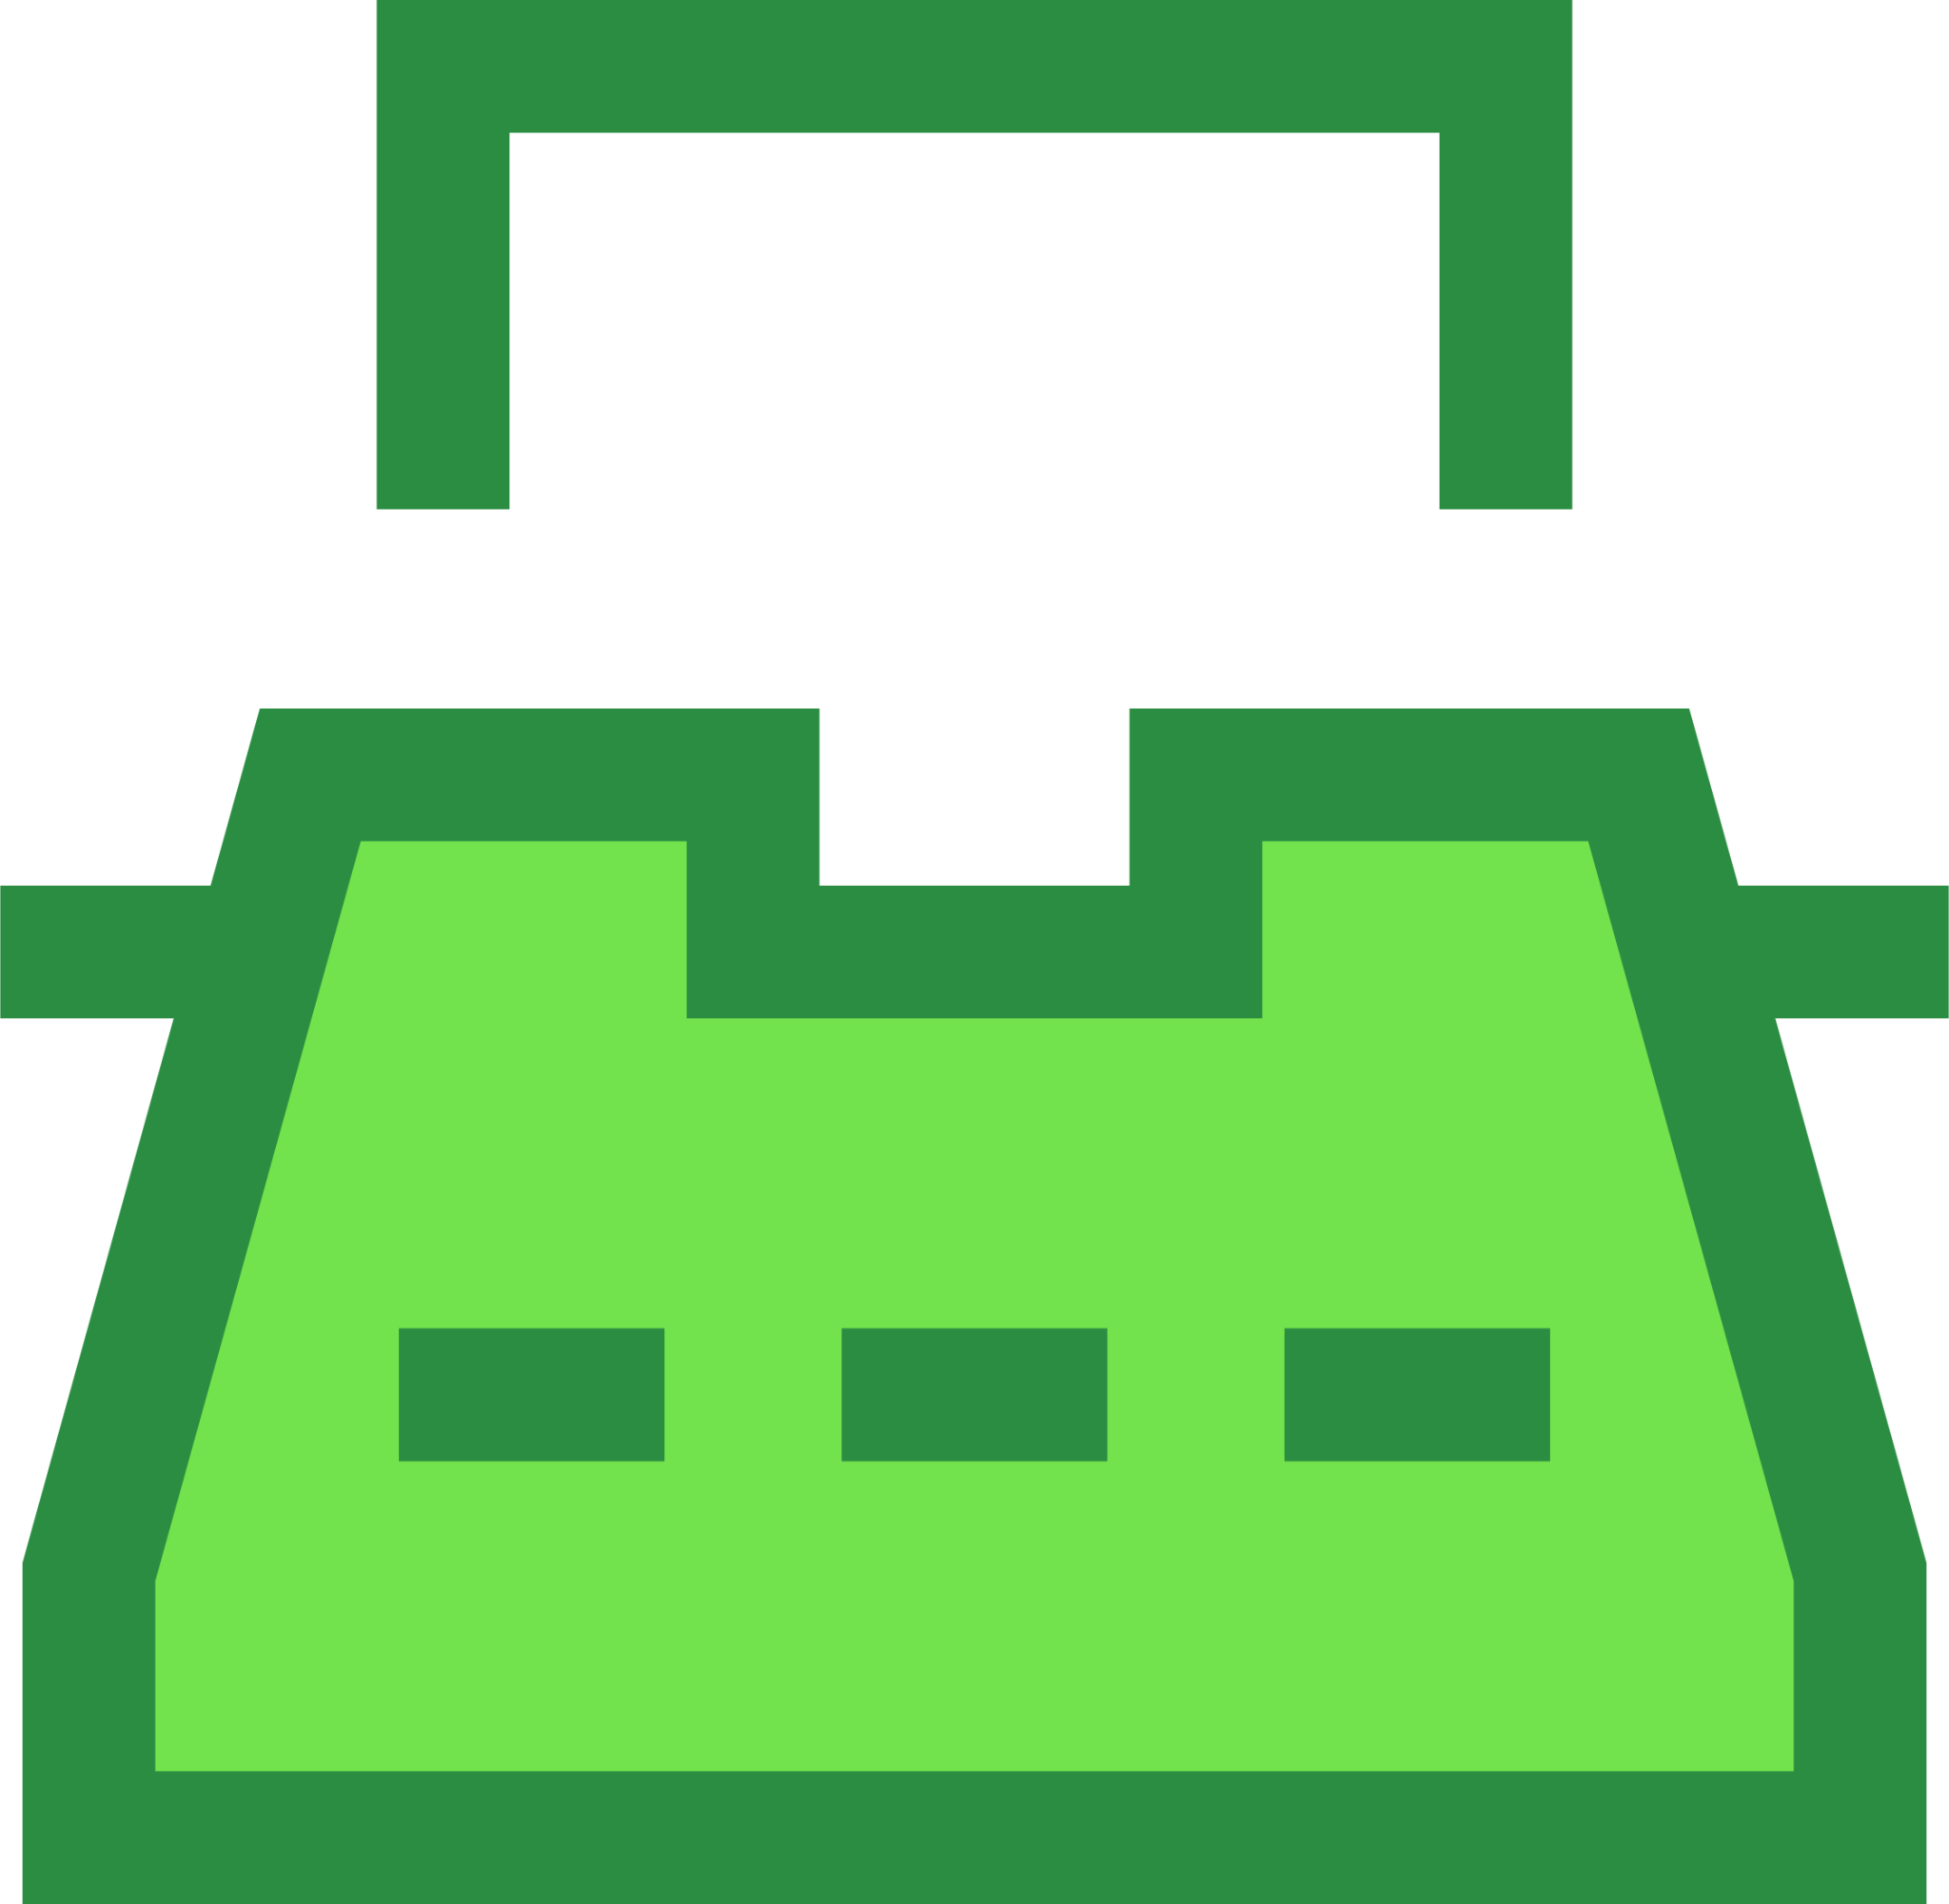 accessories text editor Icon - Download for free – Iconduck